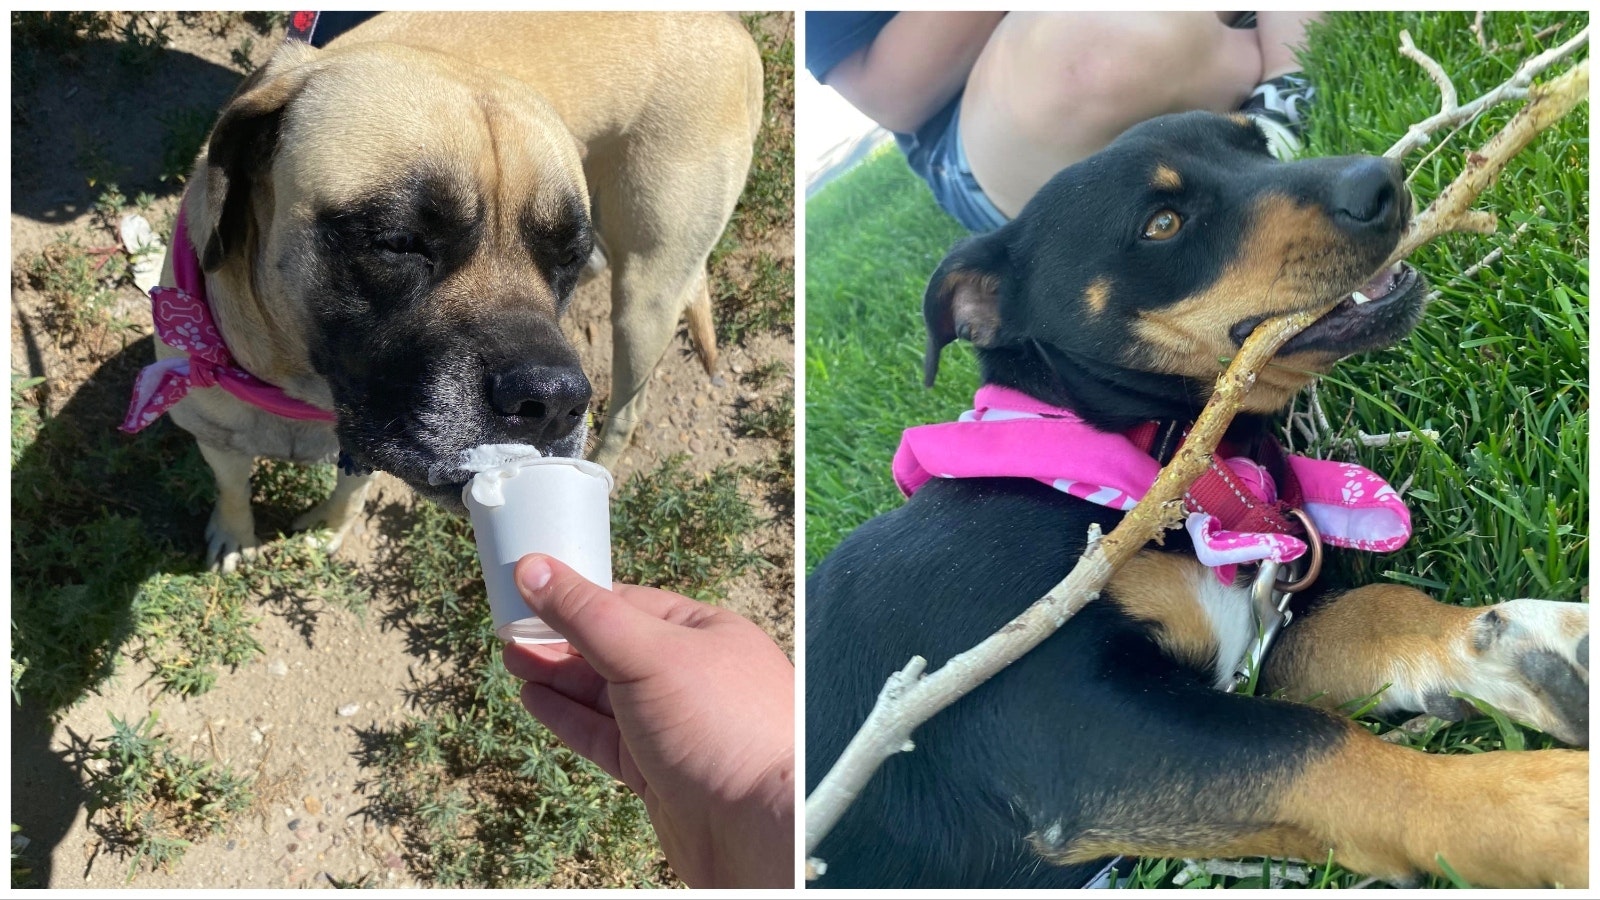 Stella, left, enjoys a pup cup as part of the Adventure Hounds program offered by the Red Desert Humane Society. Talia, right, is another of the program's playful pups.